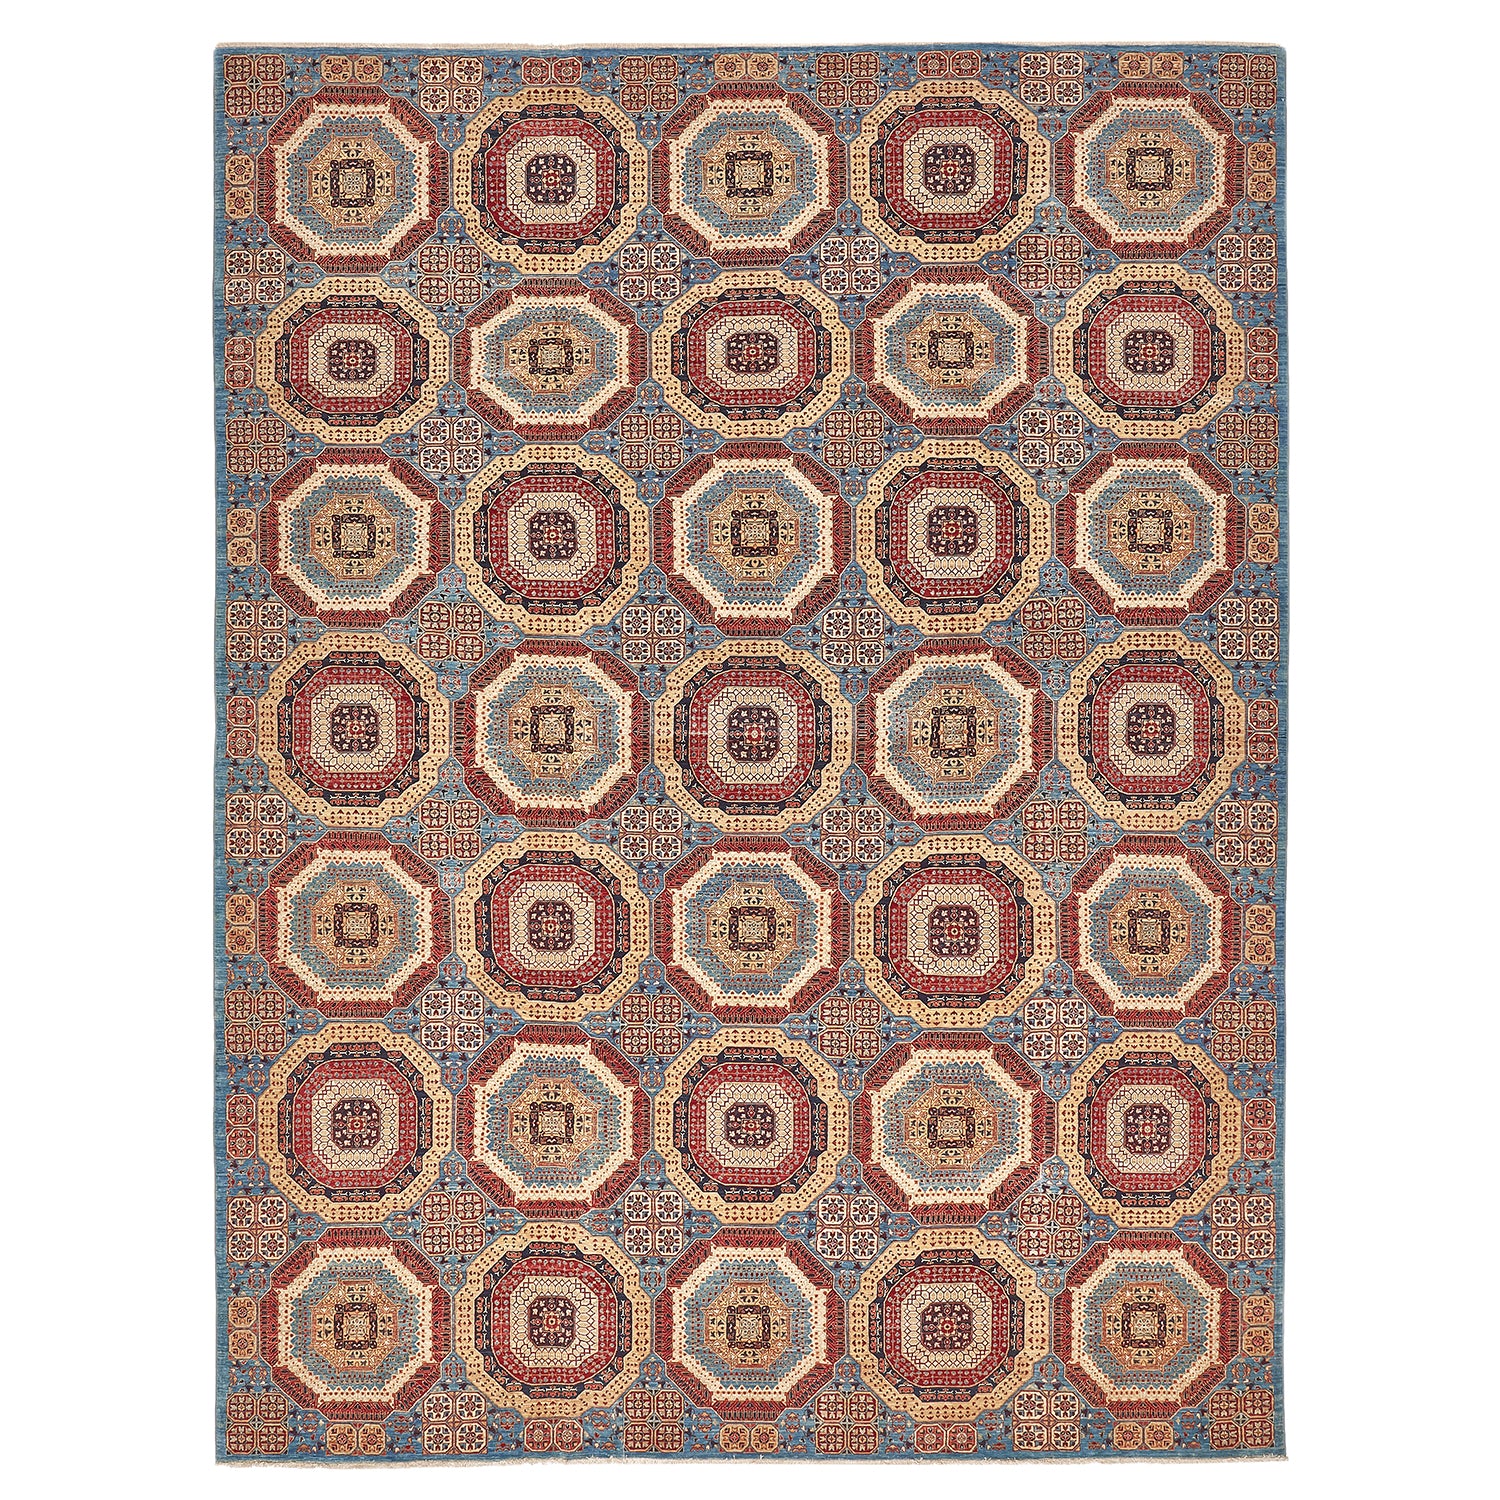 Exquisite Oriental rug showcases intricate geometric patterns in harmonious colors.